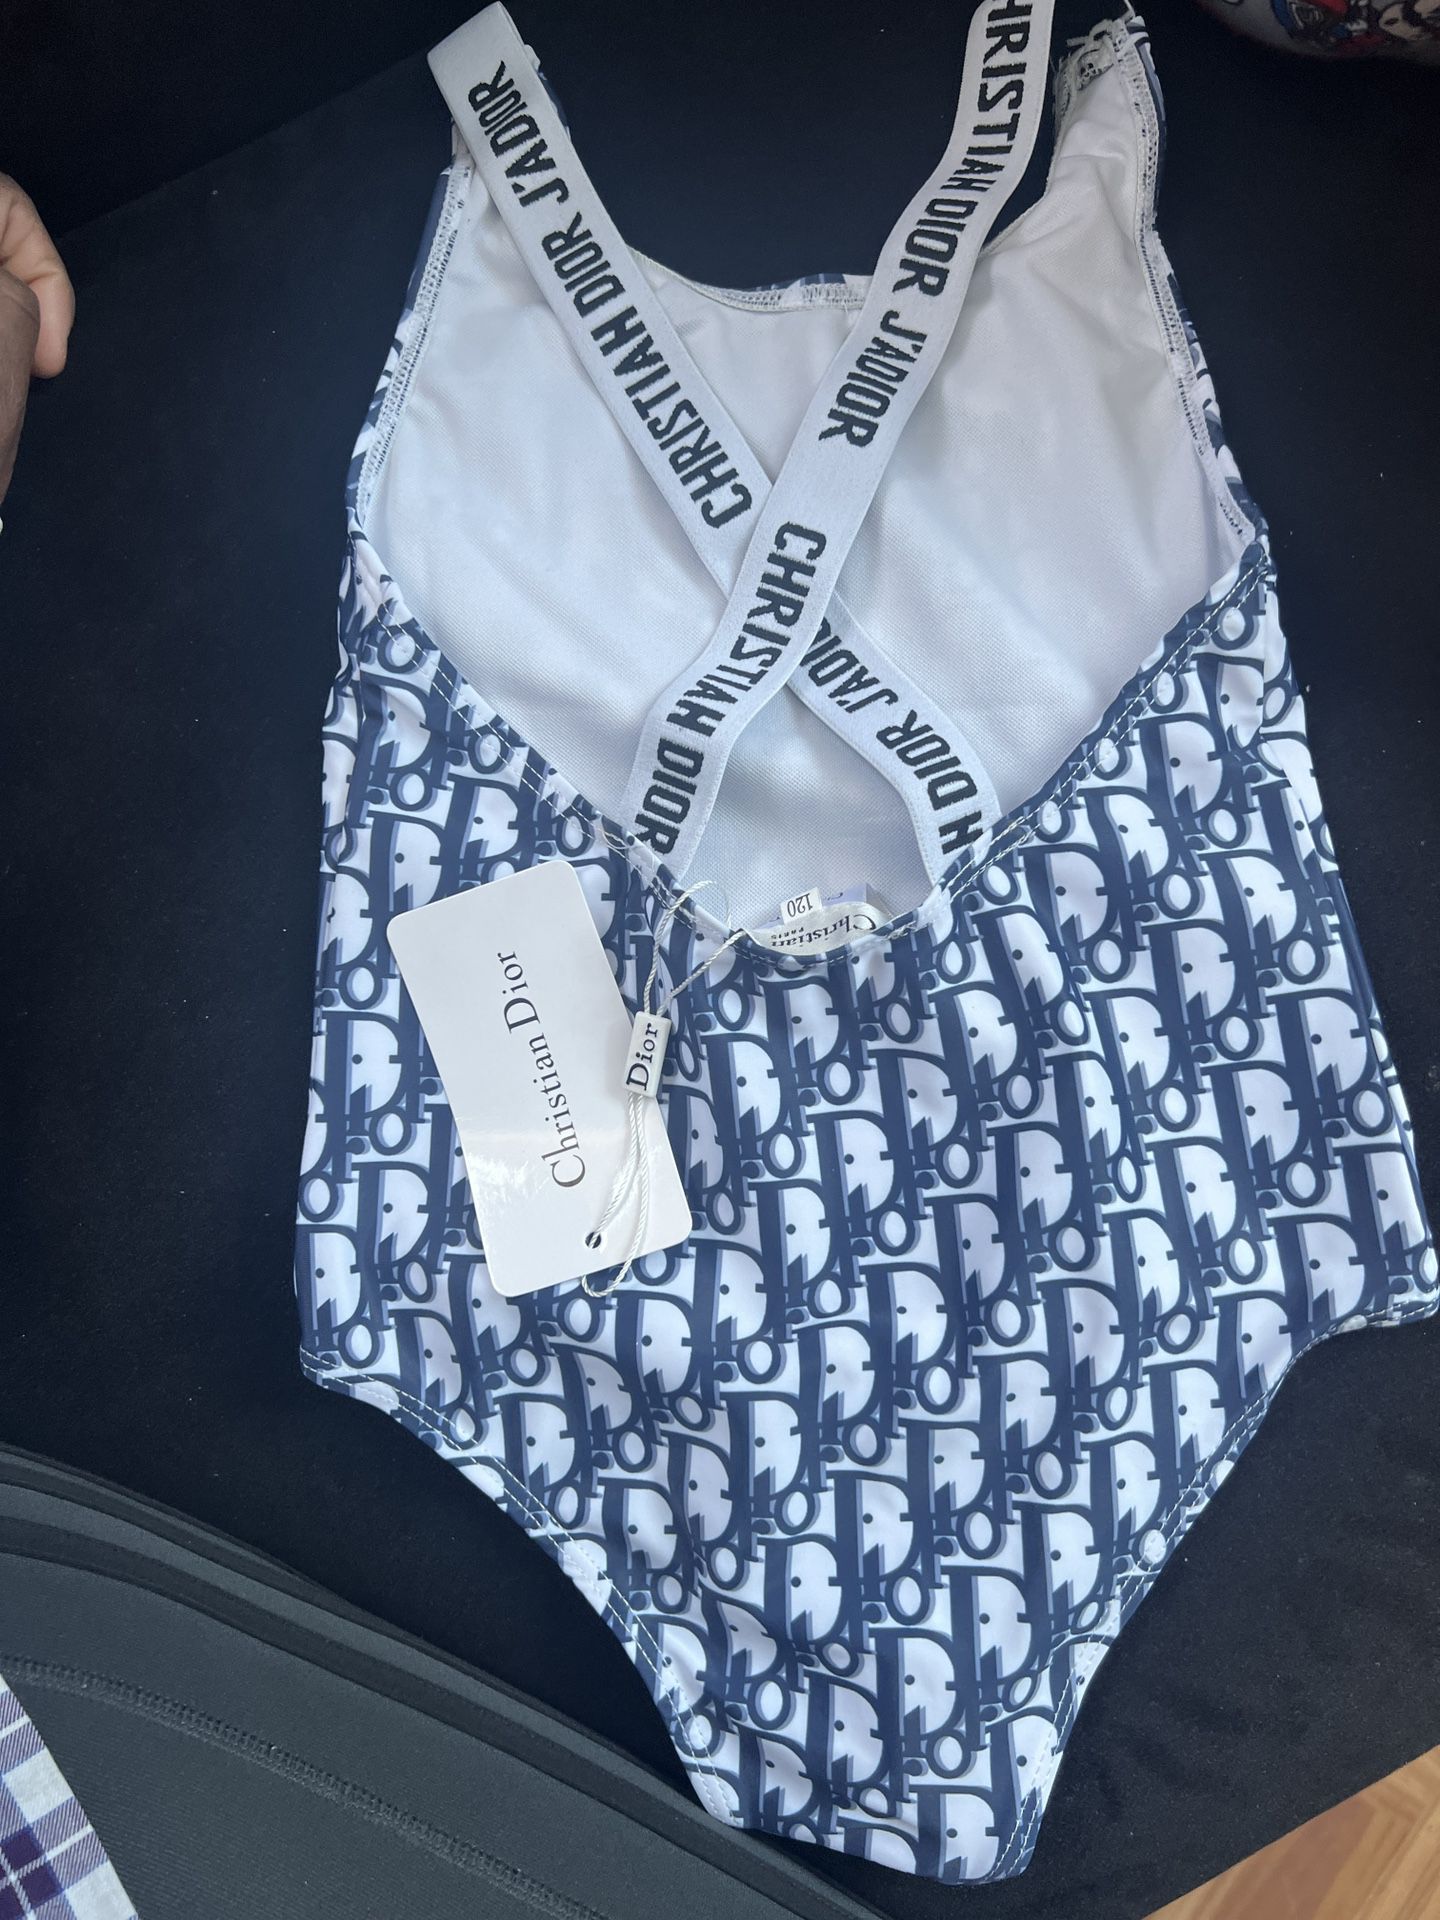 Dior Toddler Bathing Suit for Sale in New York, NY - OfferUp